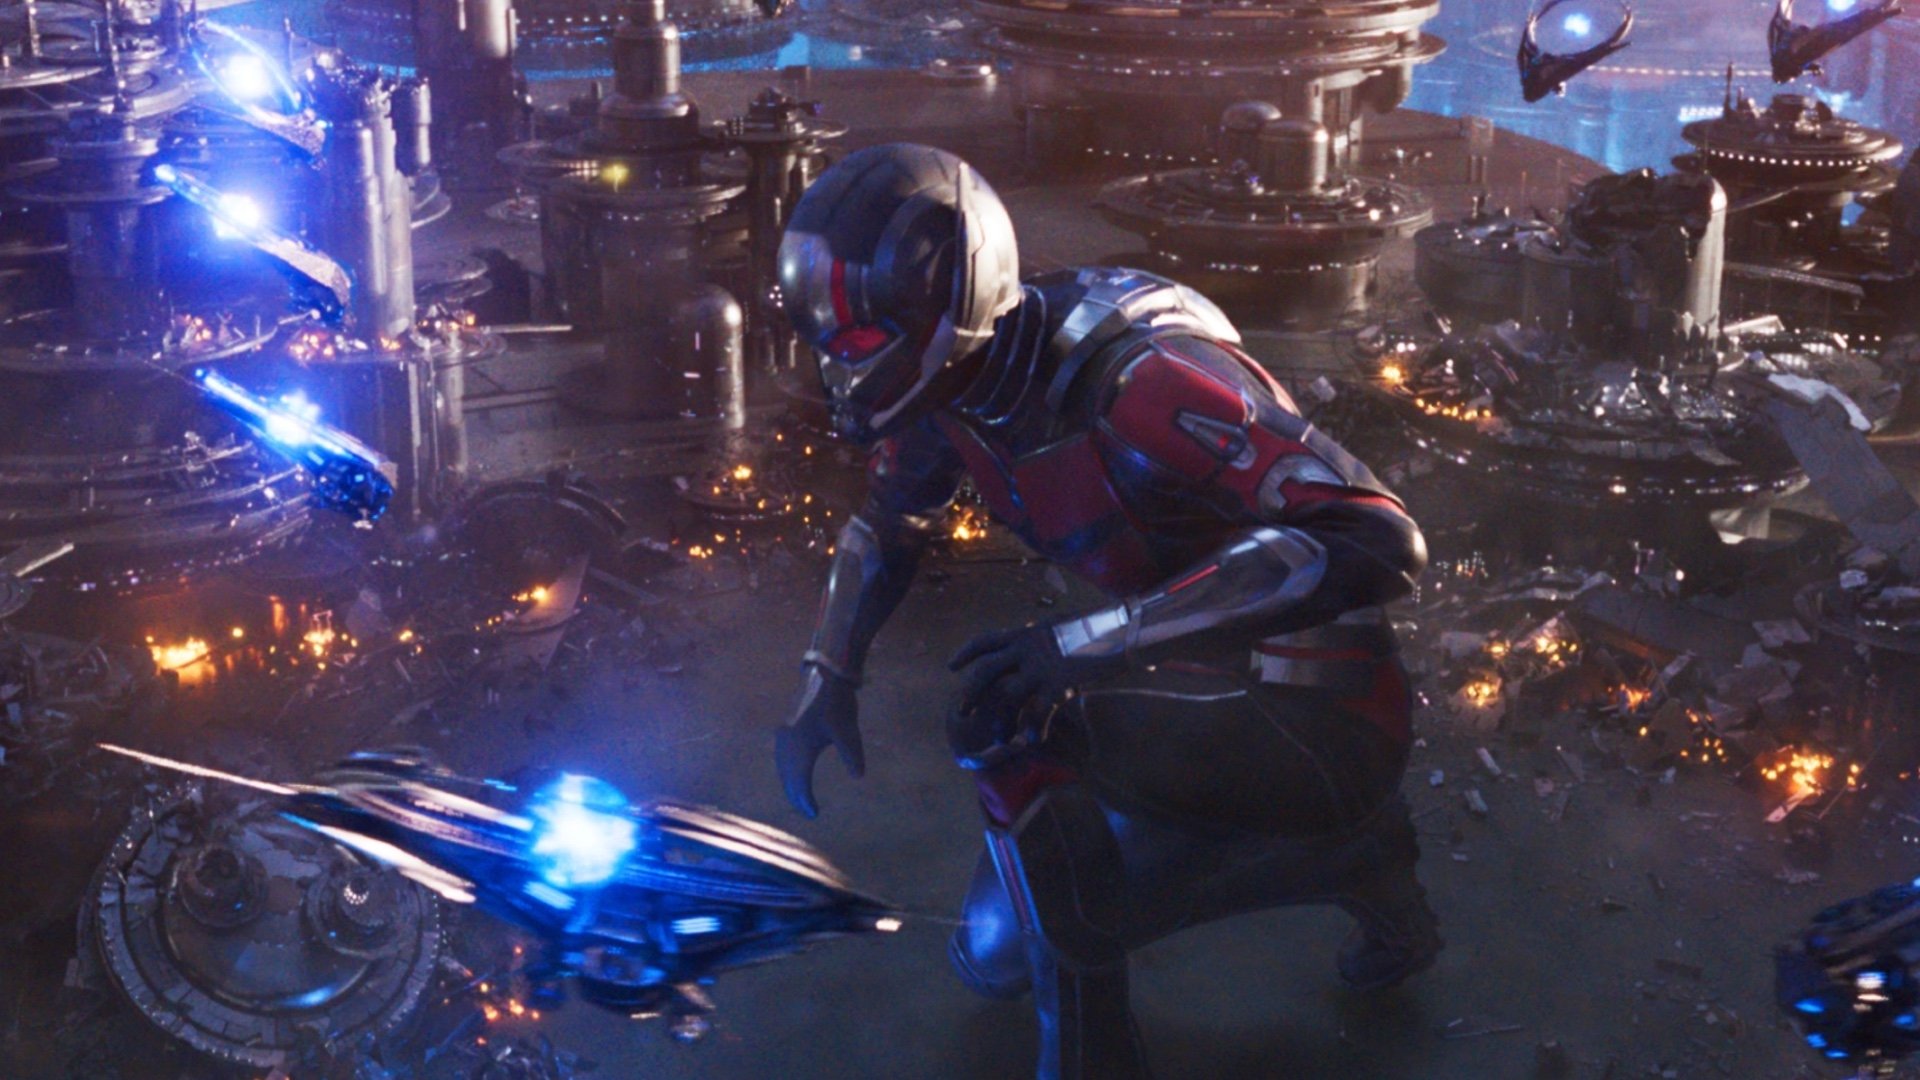 Marvel Fans Are Upset Over Ant-Man 3 CGI In New Footage